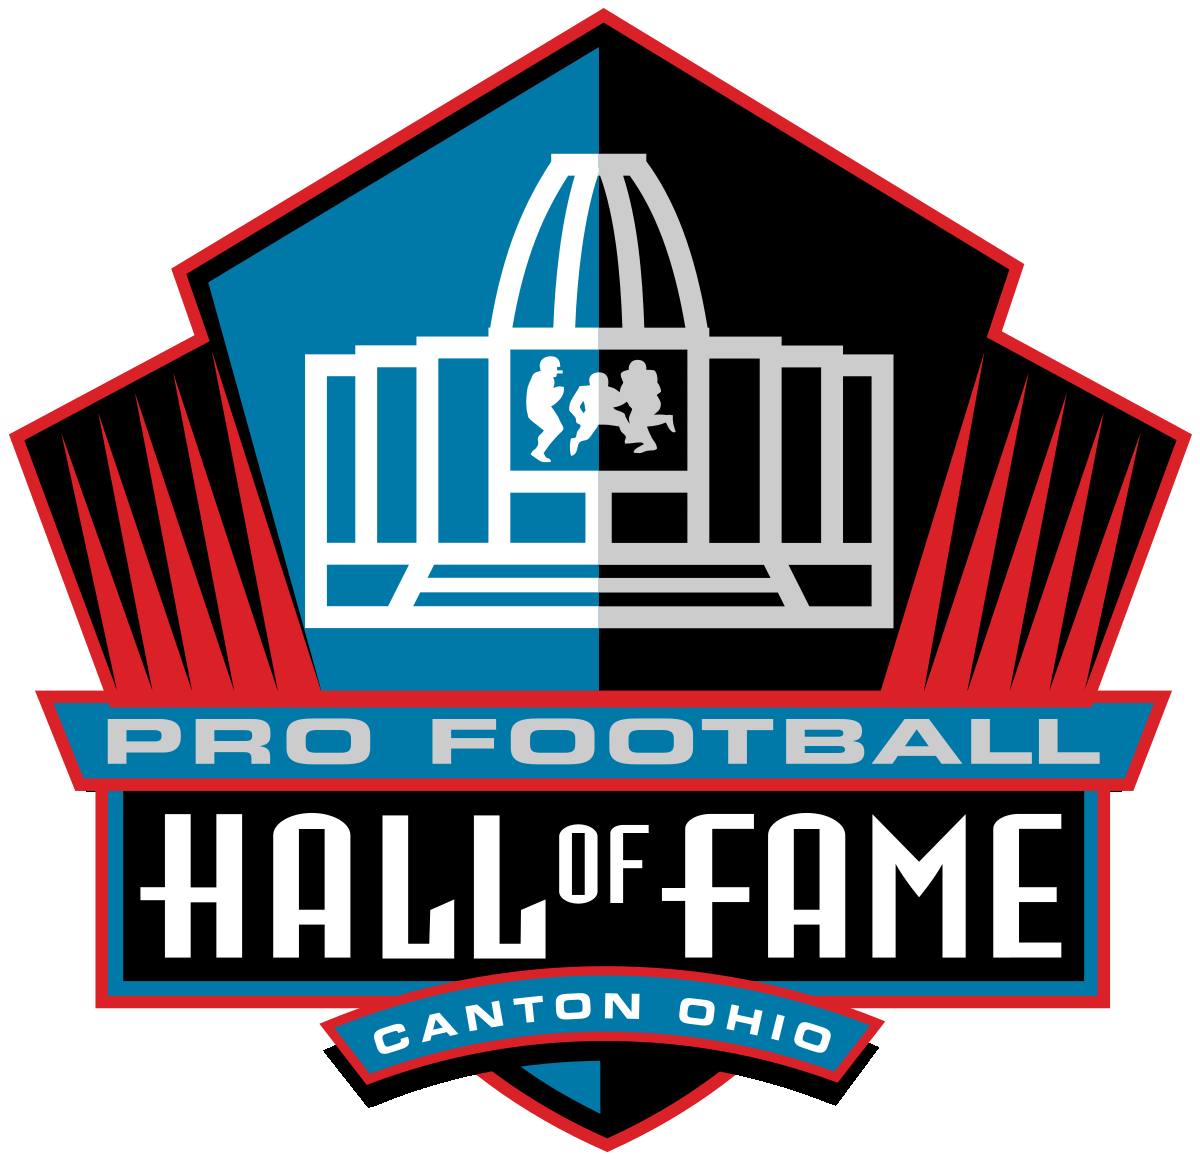 The Official Orthopedic Physicians of the Pro Football Hall of Fame